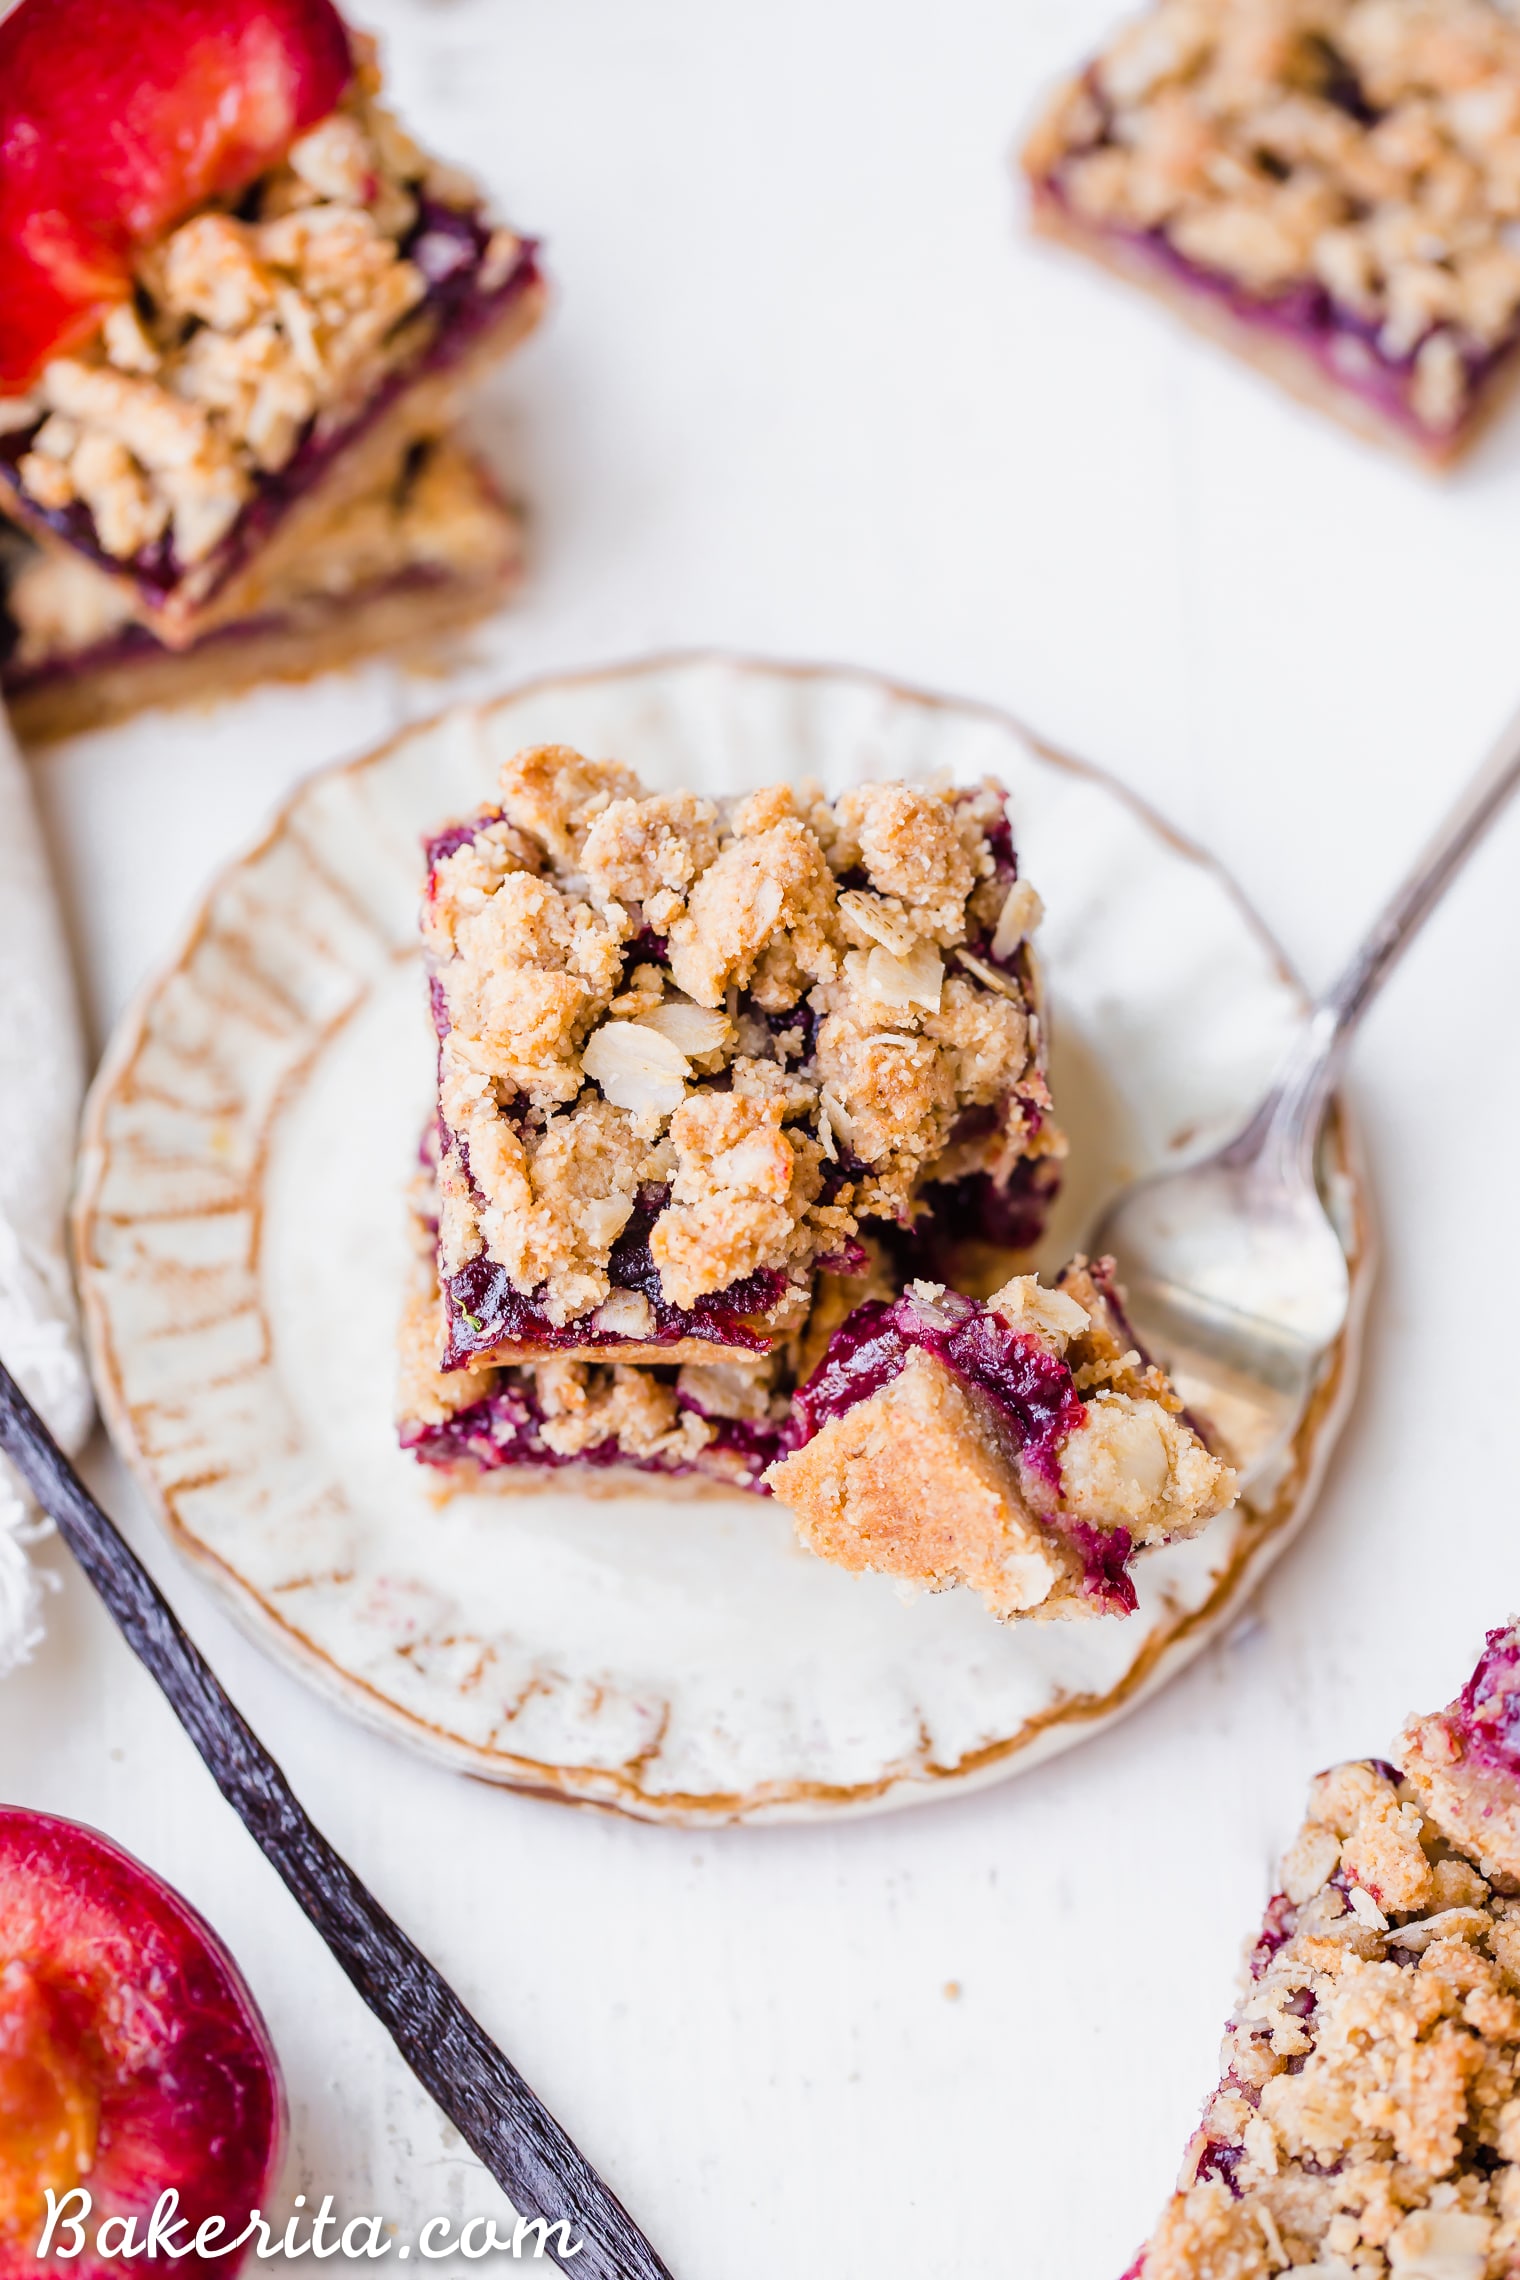 These Plum Crumble Bars have a delicious oatmeal crust and crumble topping that's filled with a simple plum jam. These simple bars highlight one of the summer's best stone fruits in a delicious gluten-free and vegan dessert.